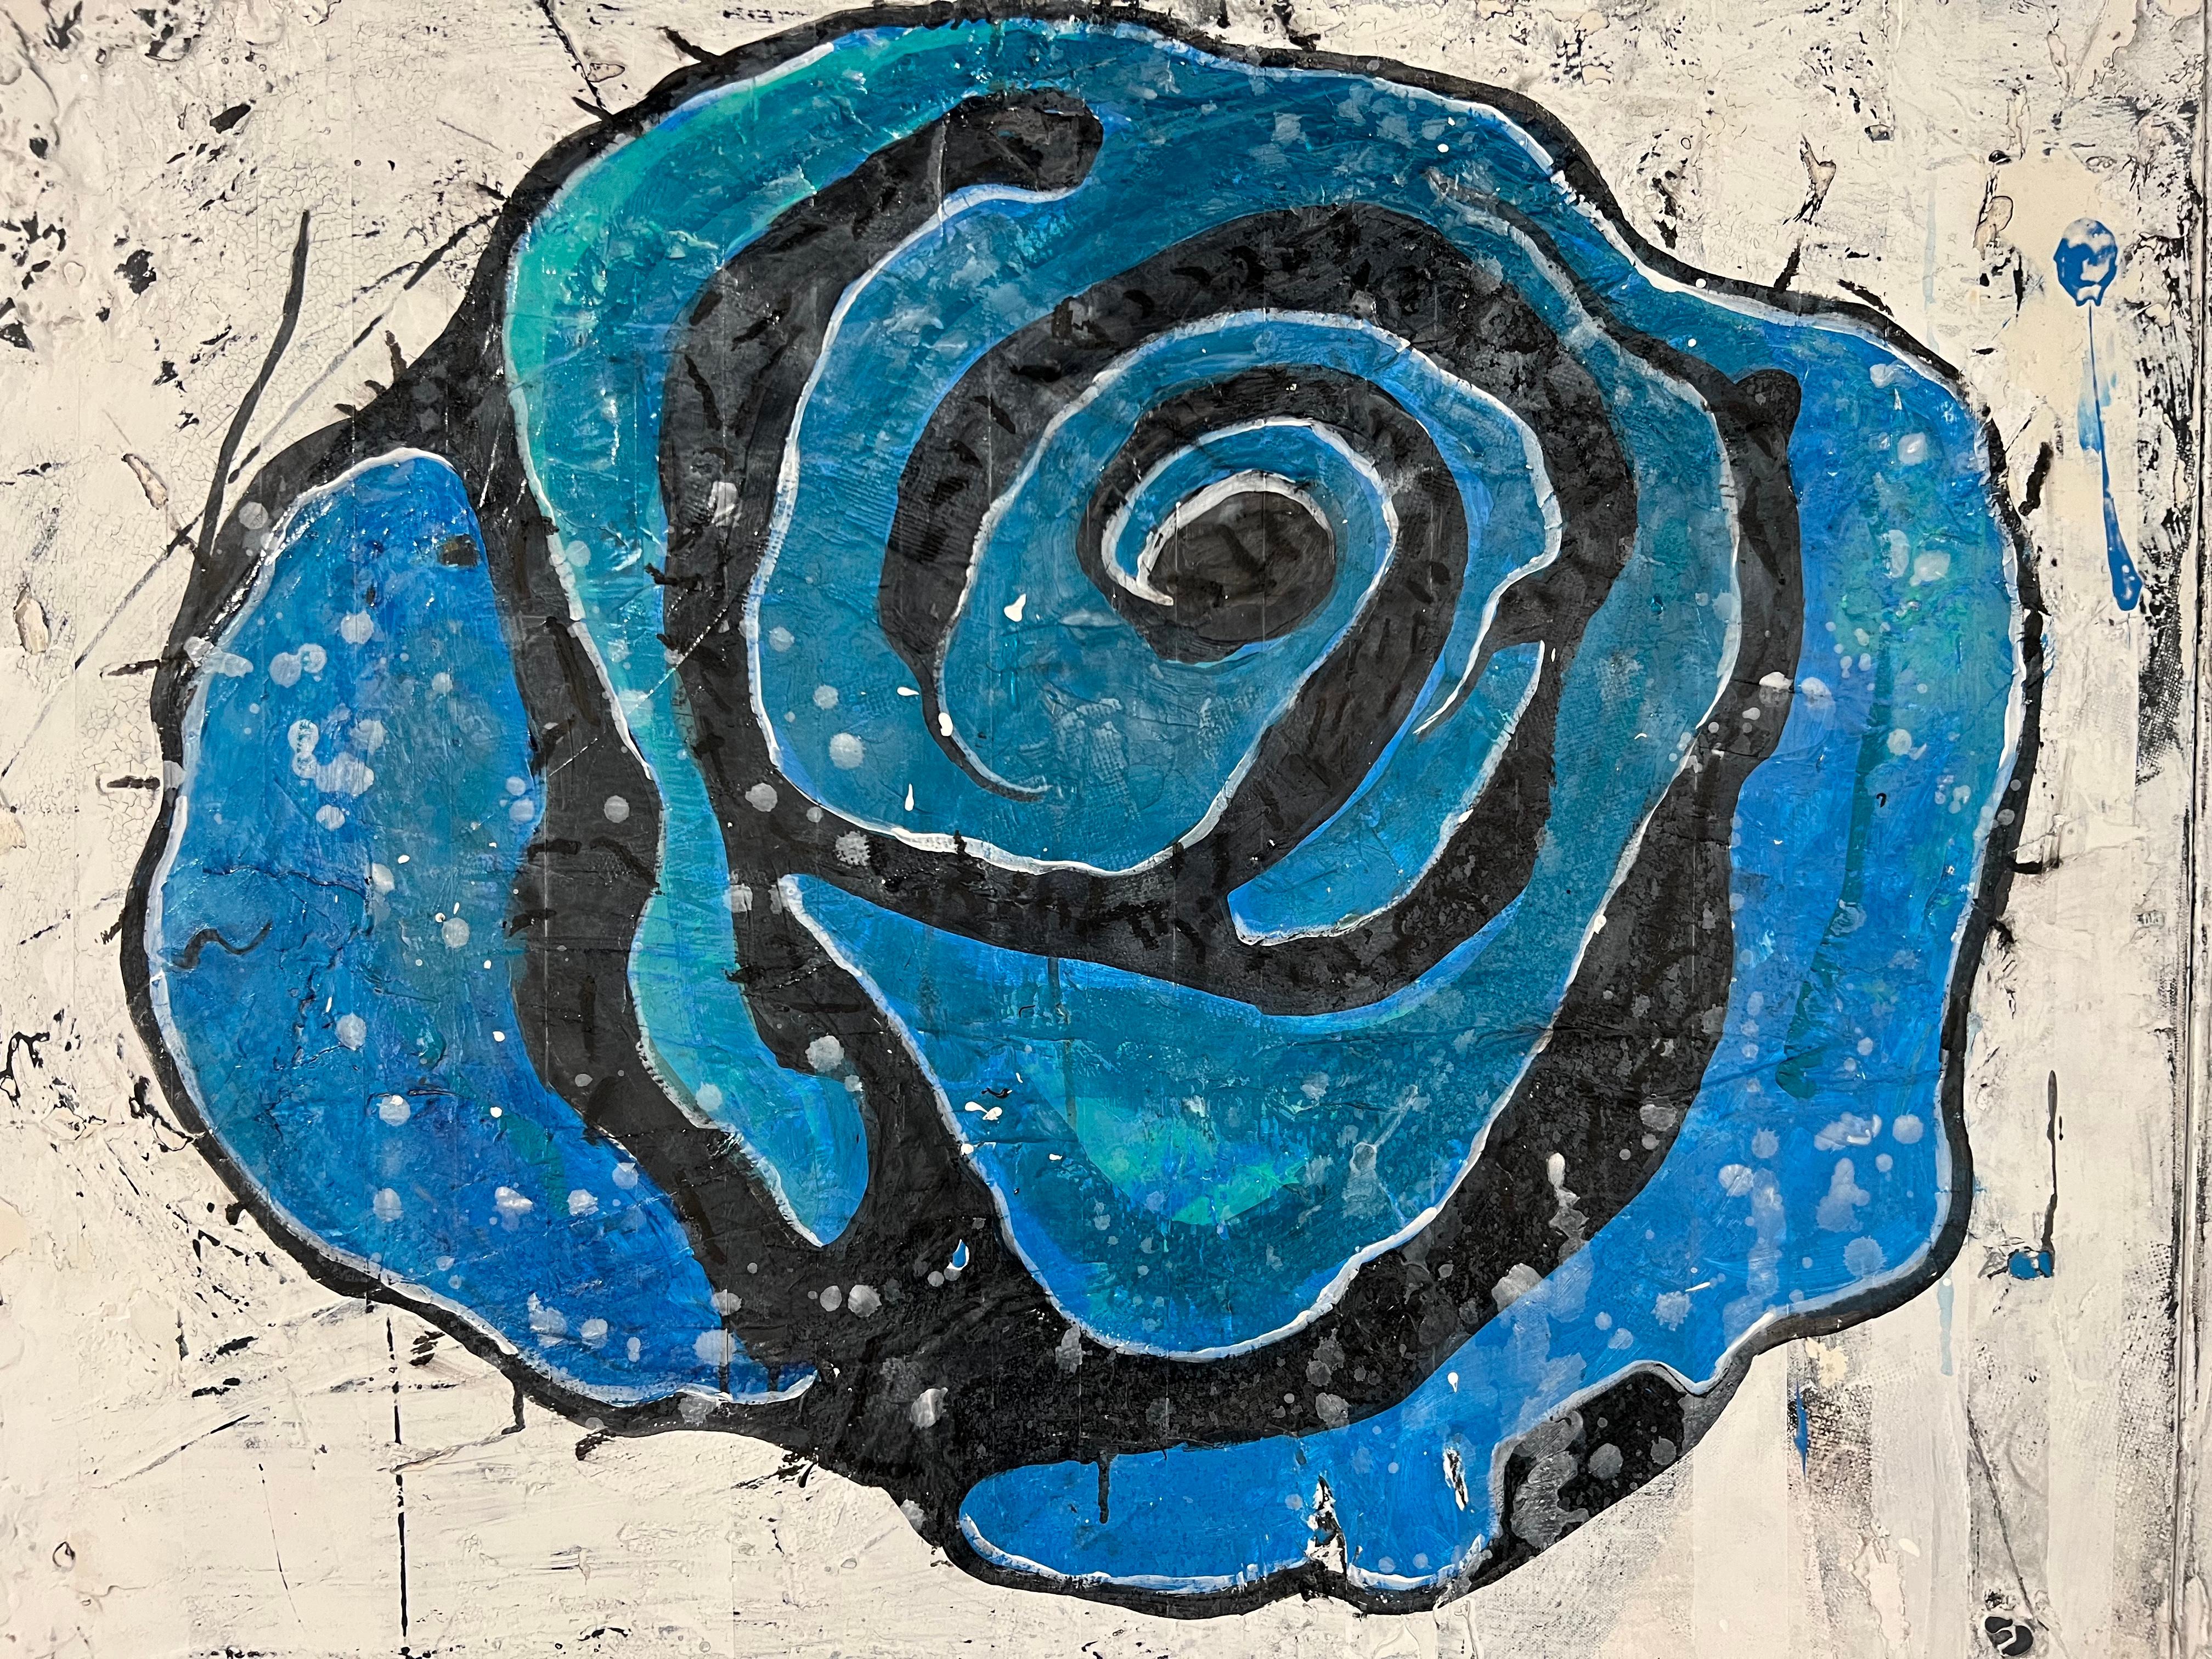 Warhol's Blues - Contemporary Mixed Media Art by Paul Ecke